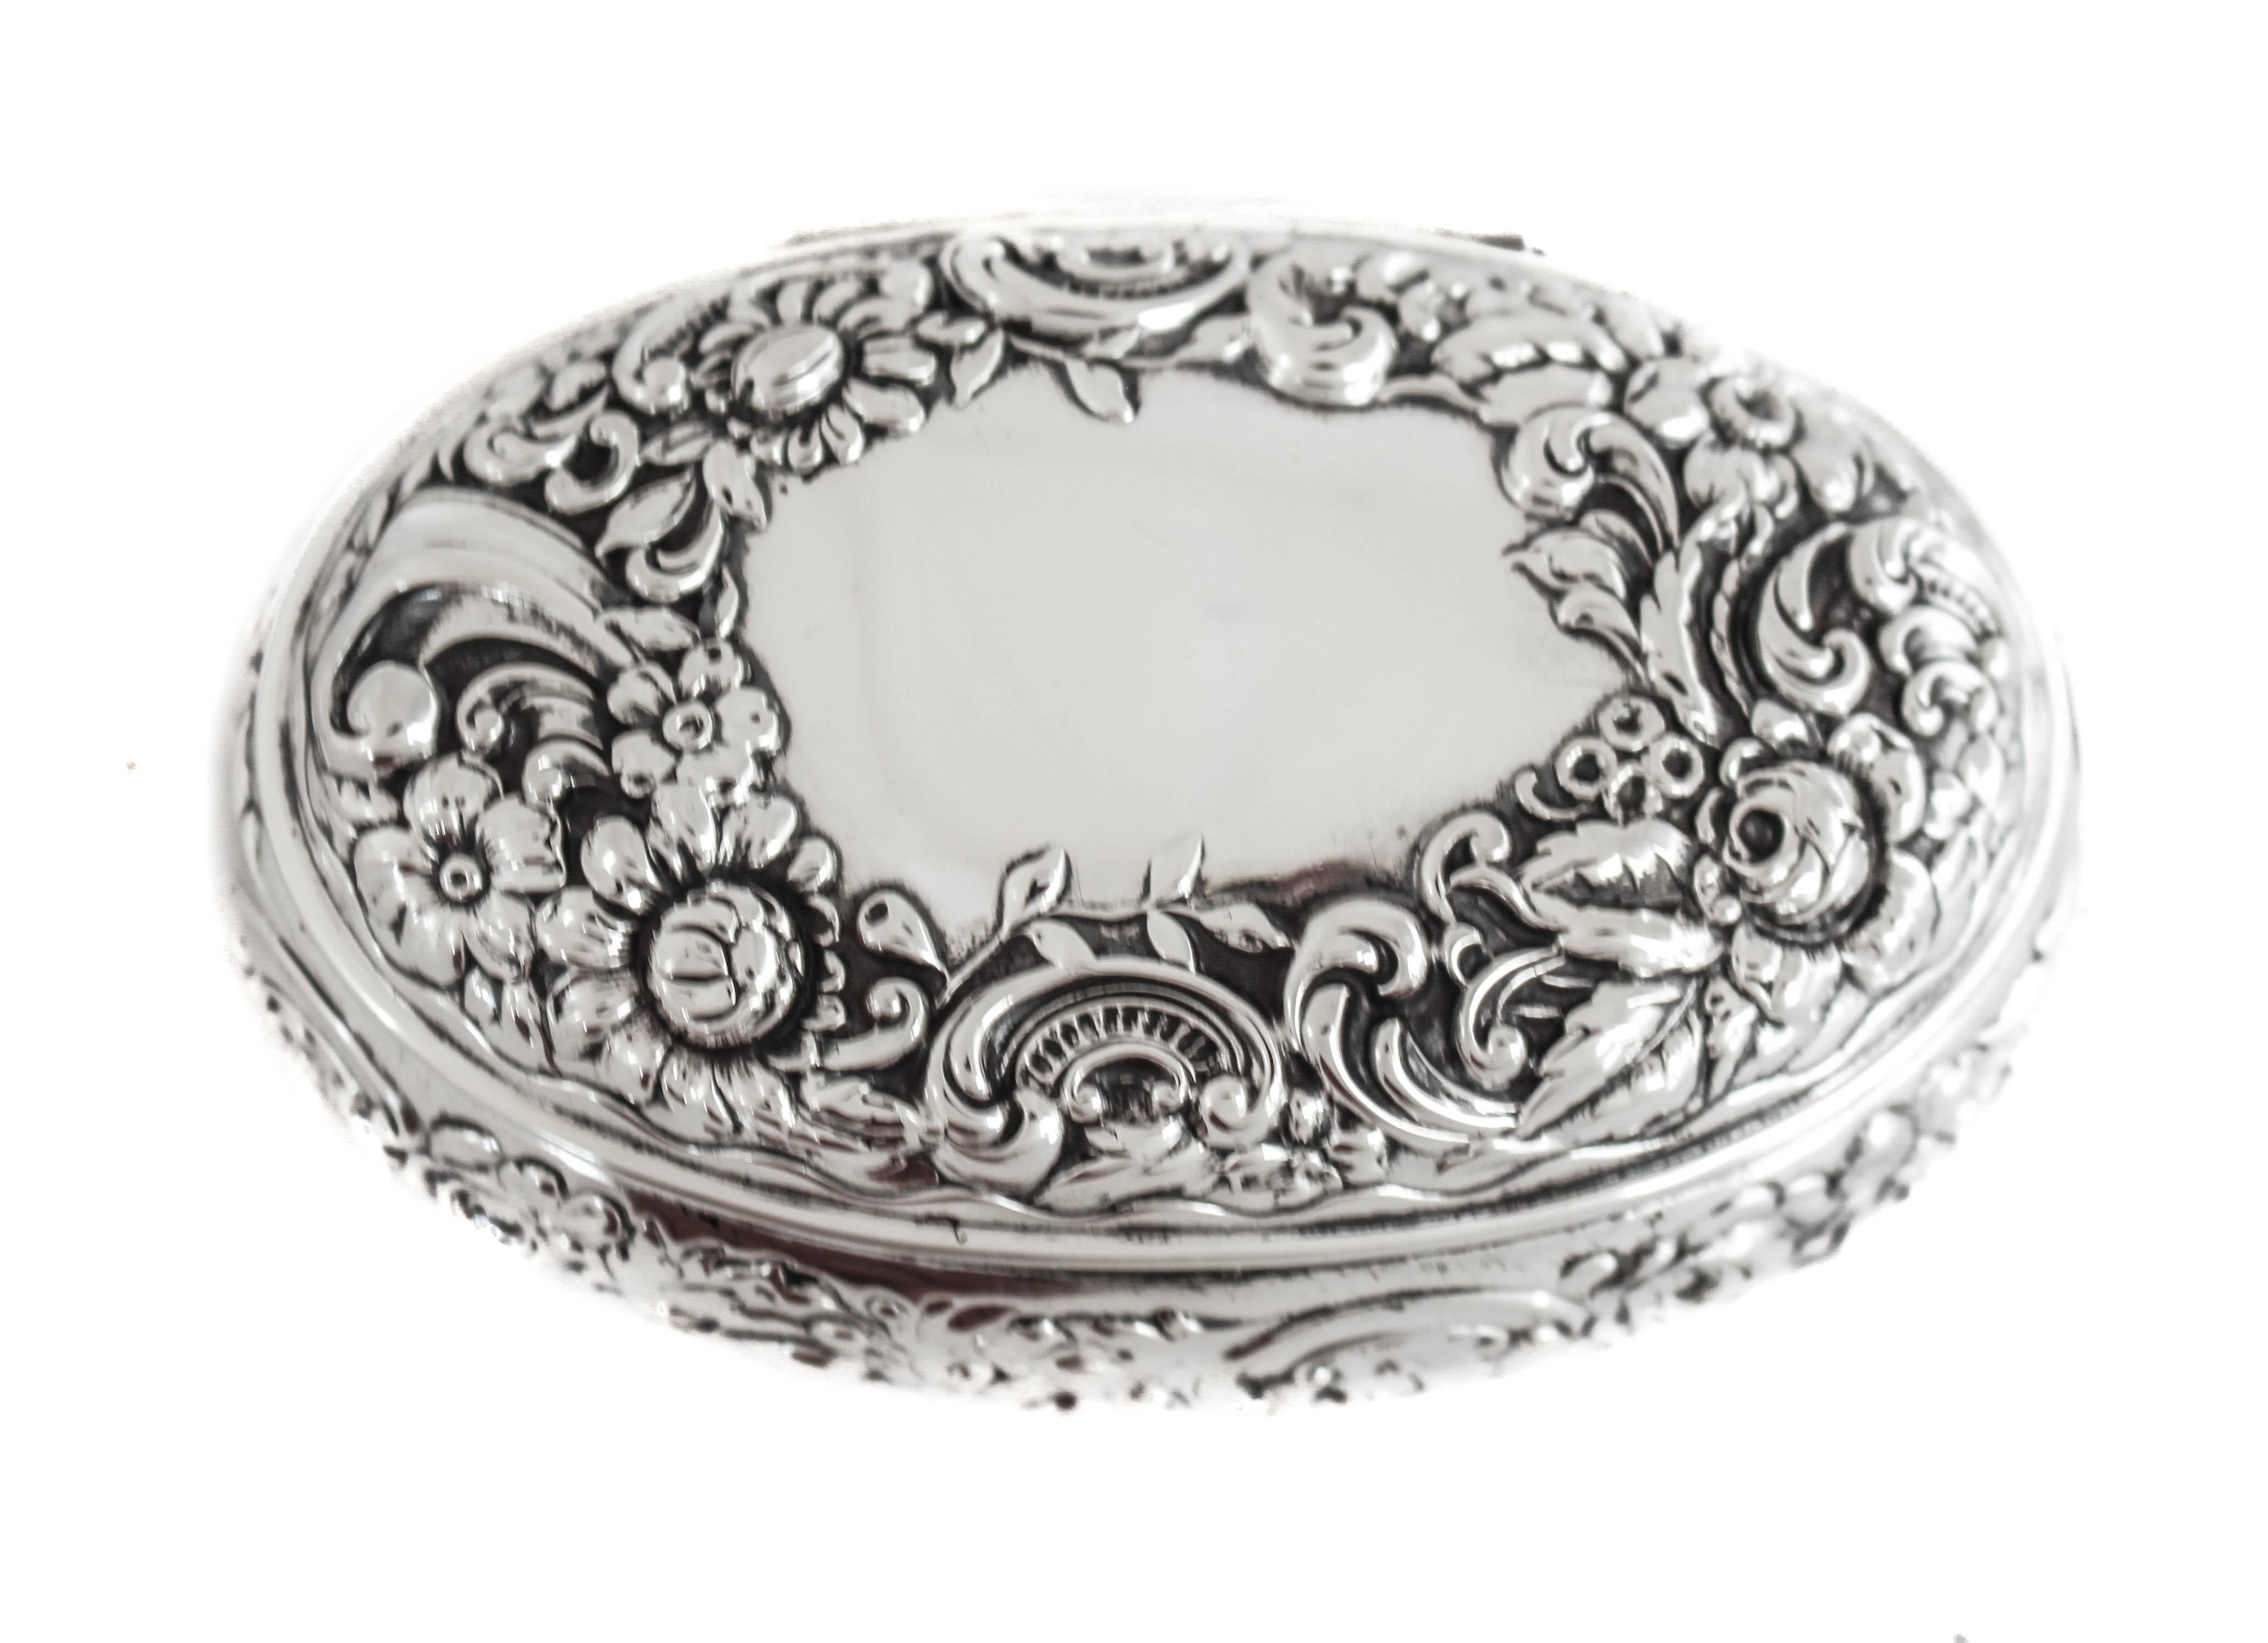 Being offered is a sterling silver (soap) box by Gorham Silversmiths of Providence, Rhode Island.  It can be used for jewelry, pills or as a decorative piece but I think it was meant for soaps.  It has a Repousse motif; flowers, leaves and swirls